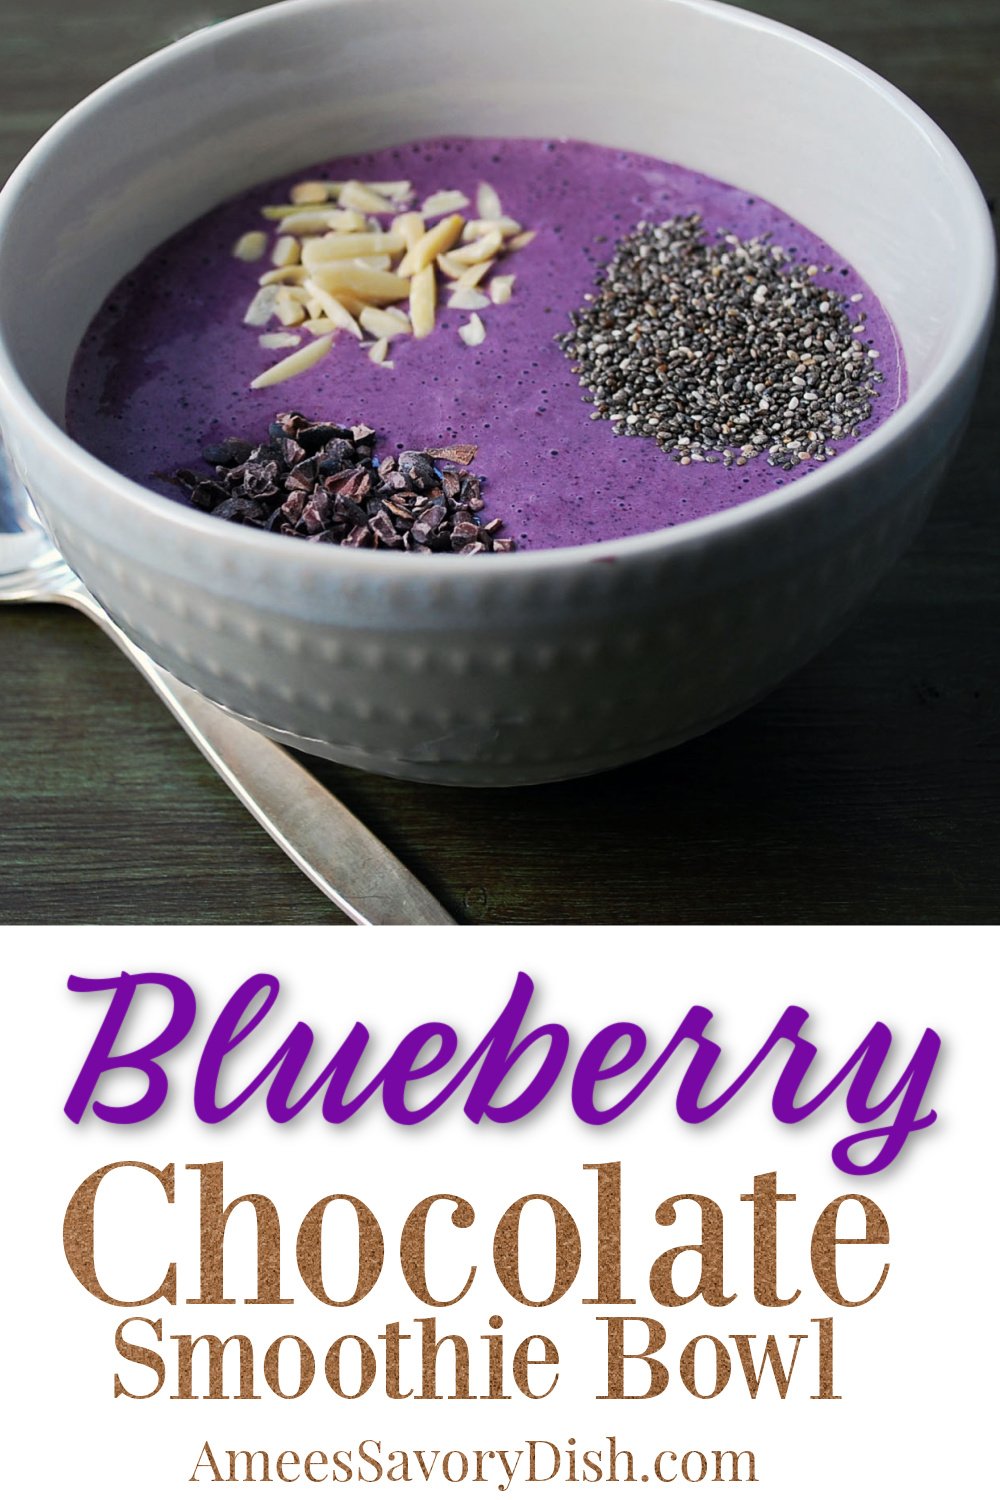 Blueberry Chocolate Smoothie Bowl Amees Savory Dish